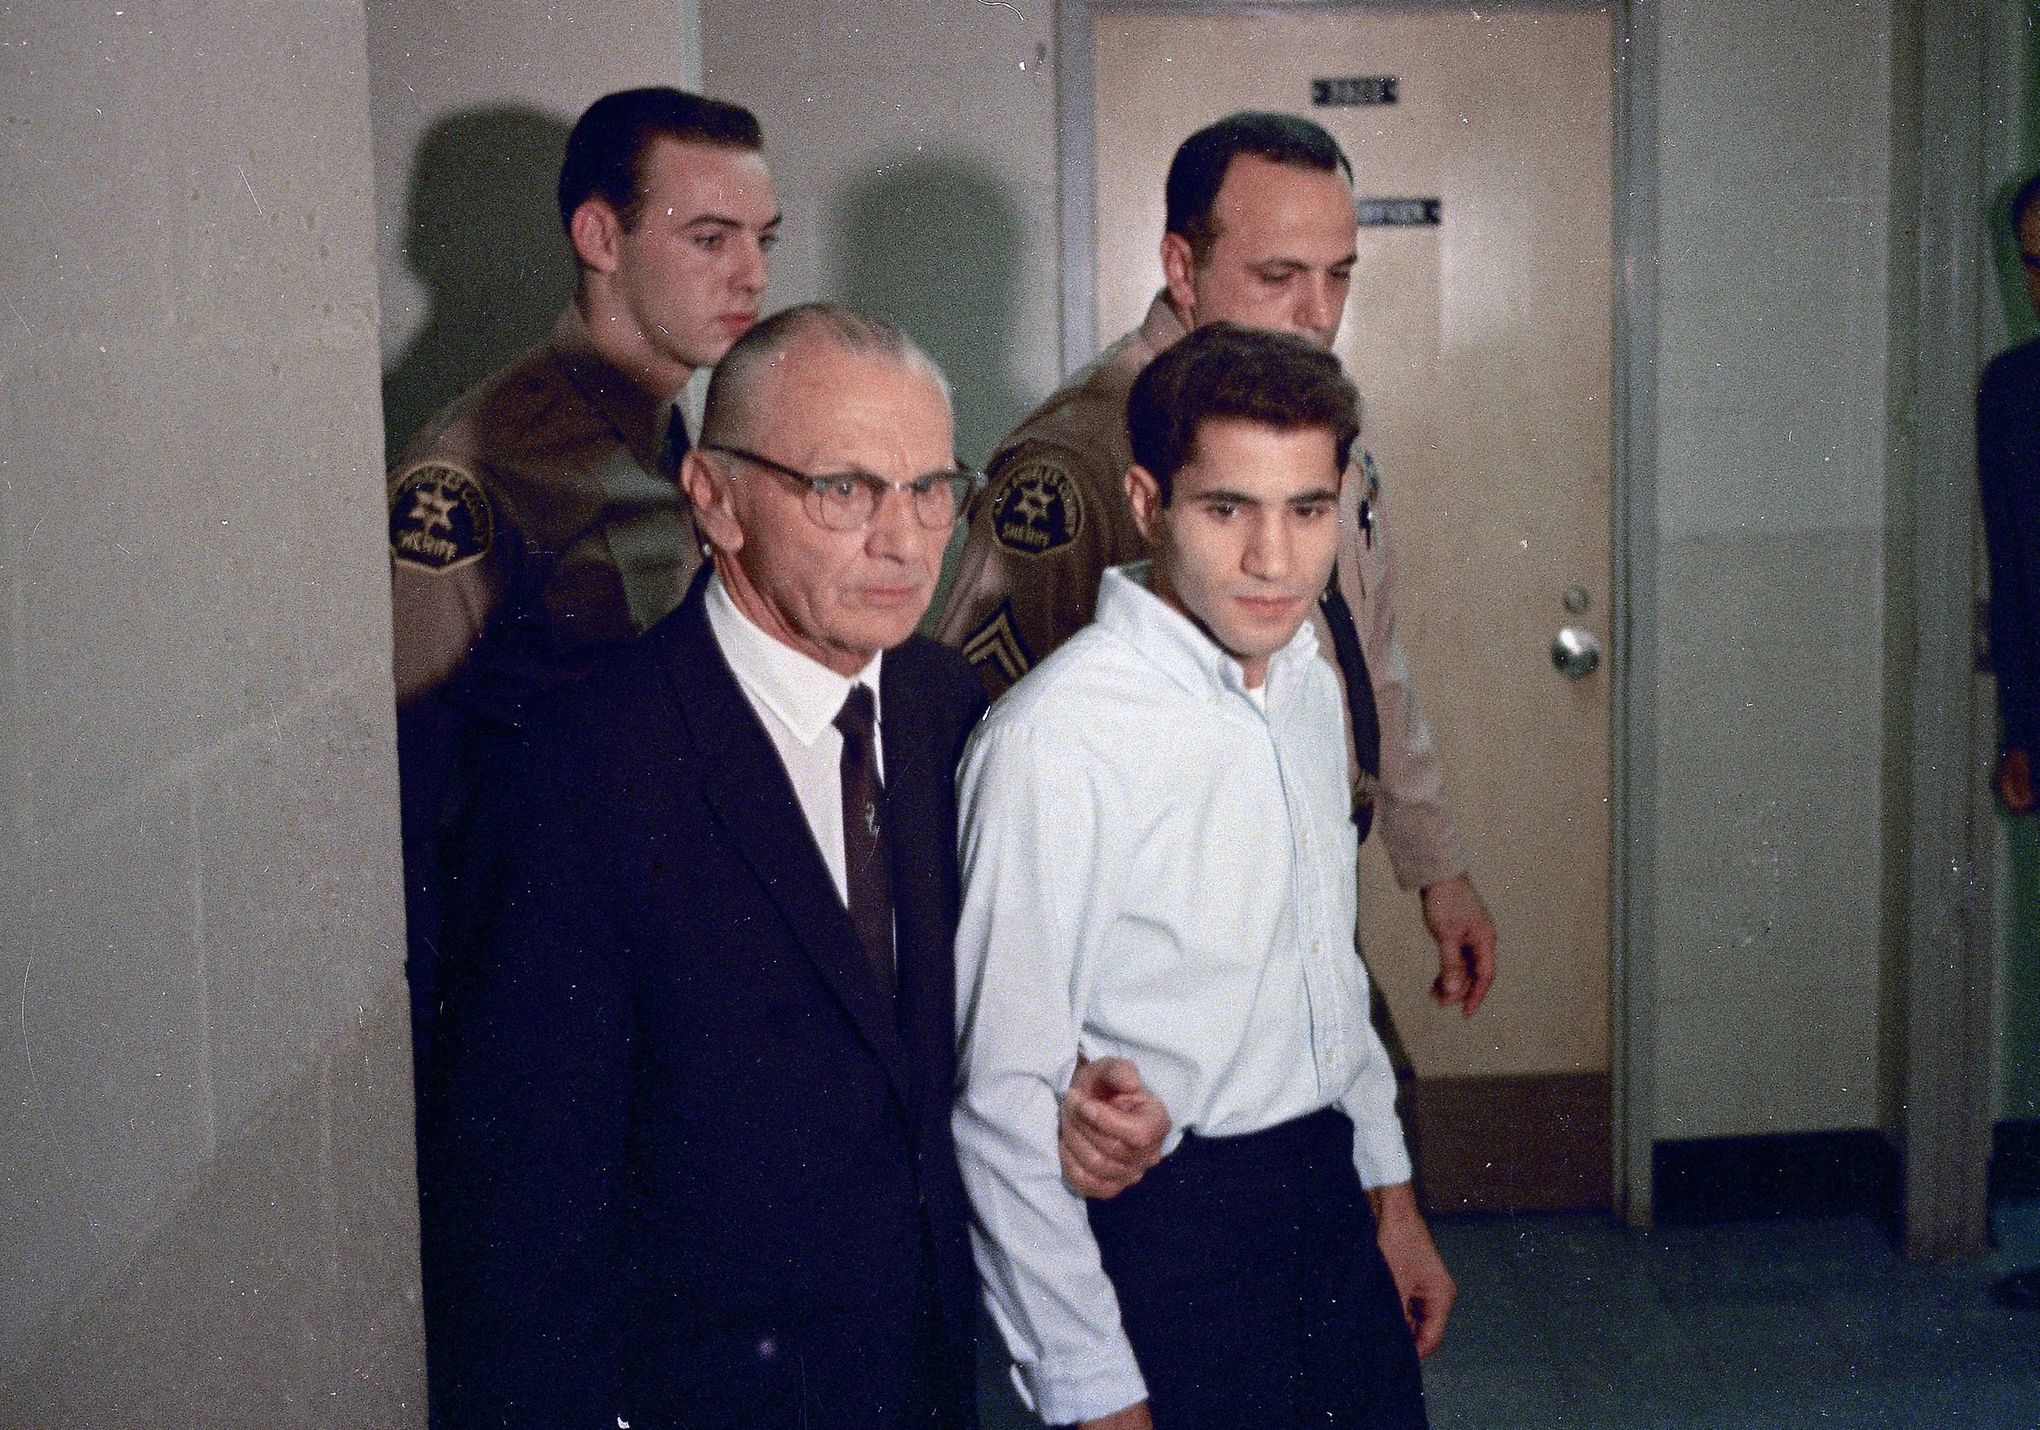 Sirhan Sirhan, convicted of Robert F. Kennedy assassination, seeks parole  with no opposition from prosecutors | The Seattle Times